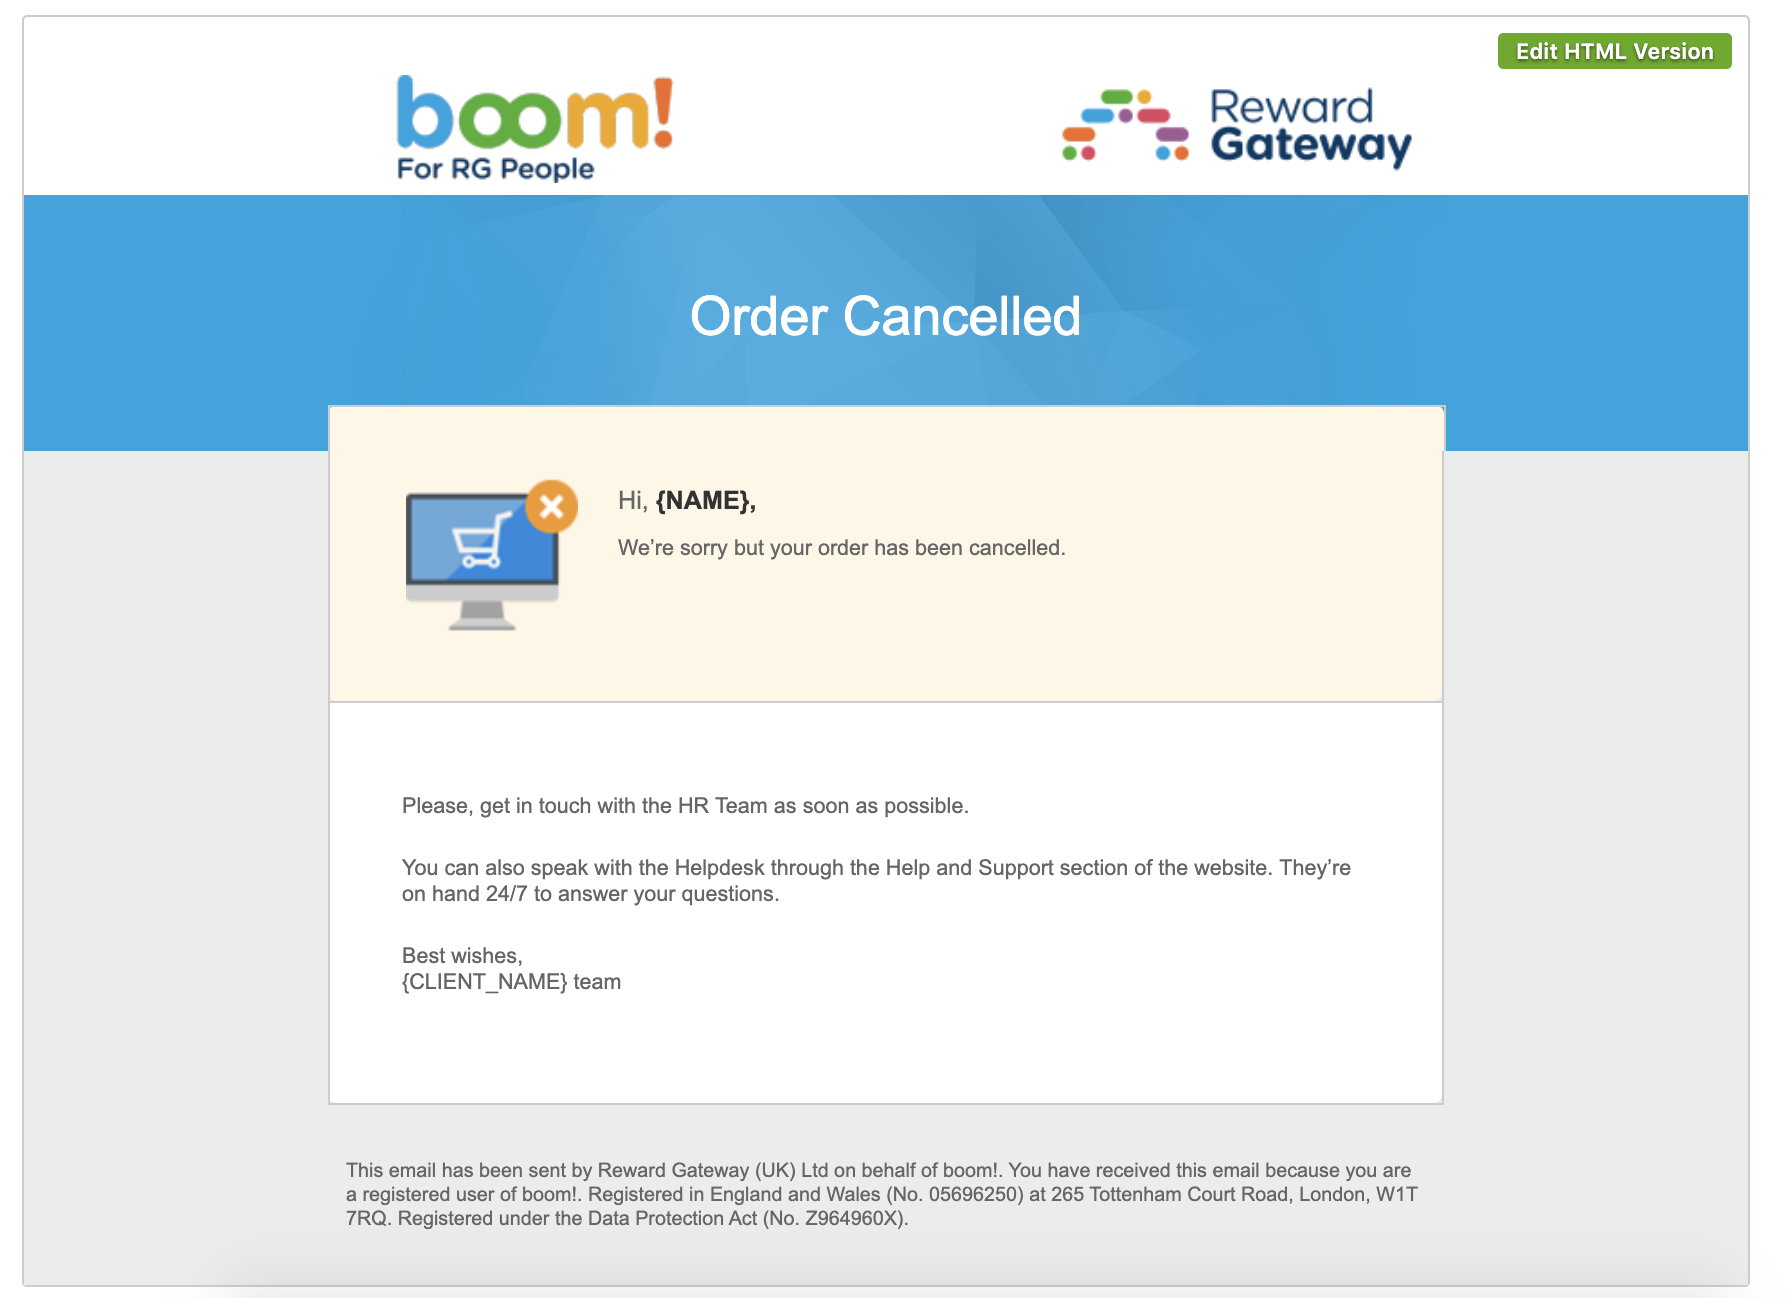 order_cancelled.png